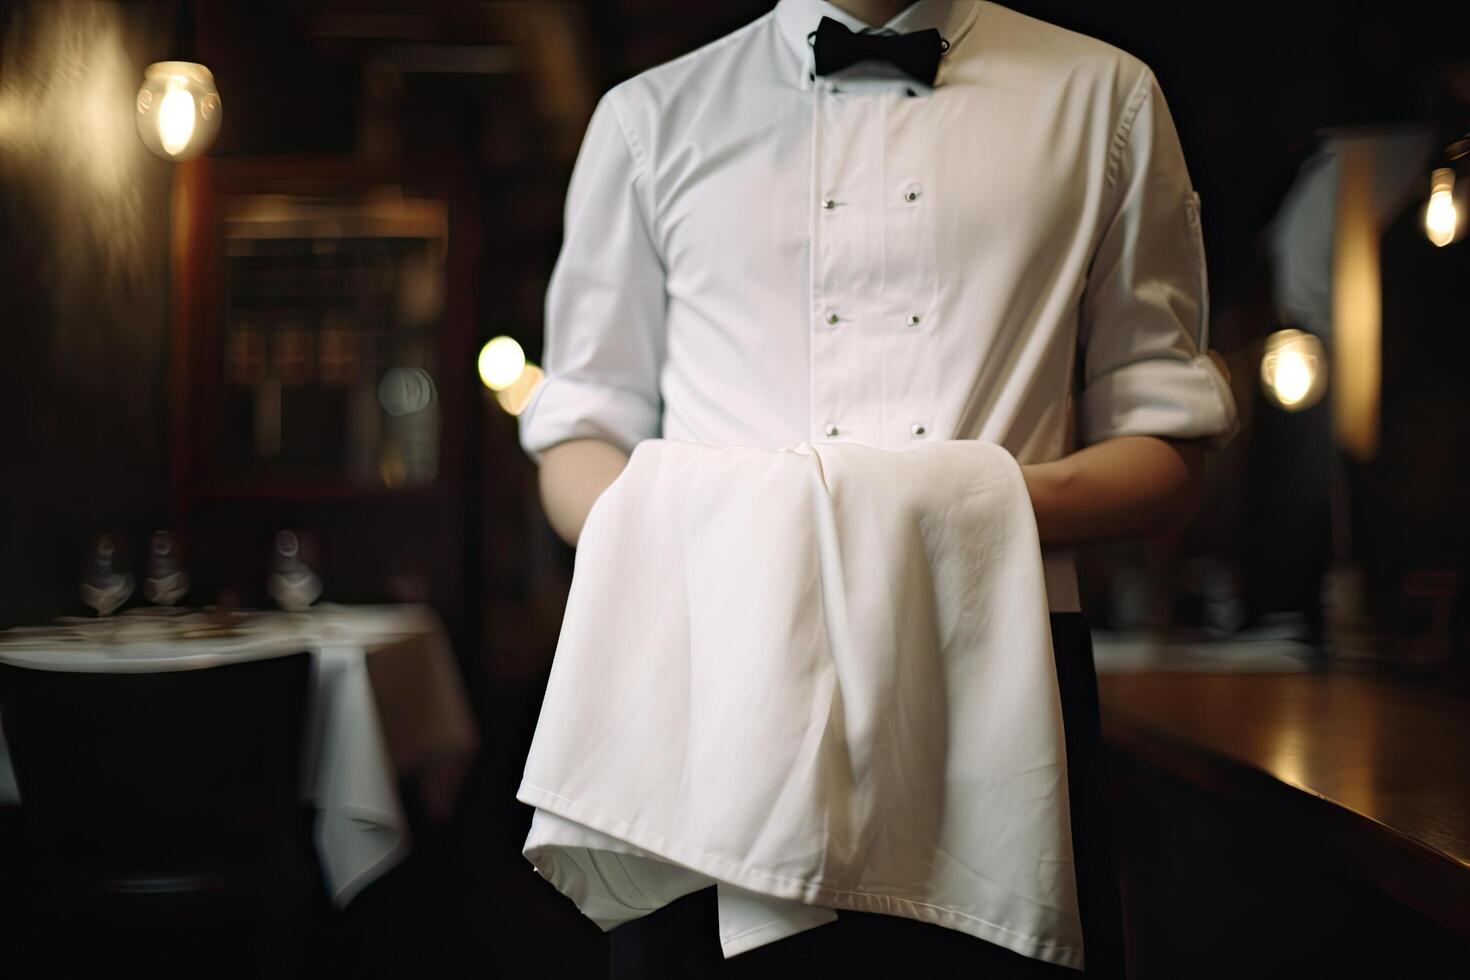 Waiter with a white shirt and bow tie in a restaurant. A male server wearing a server uniform and holding a towel, photo